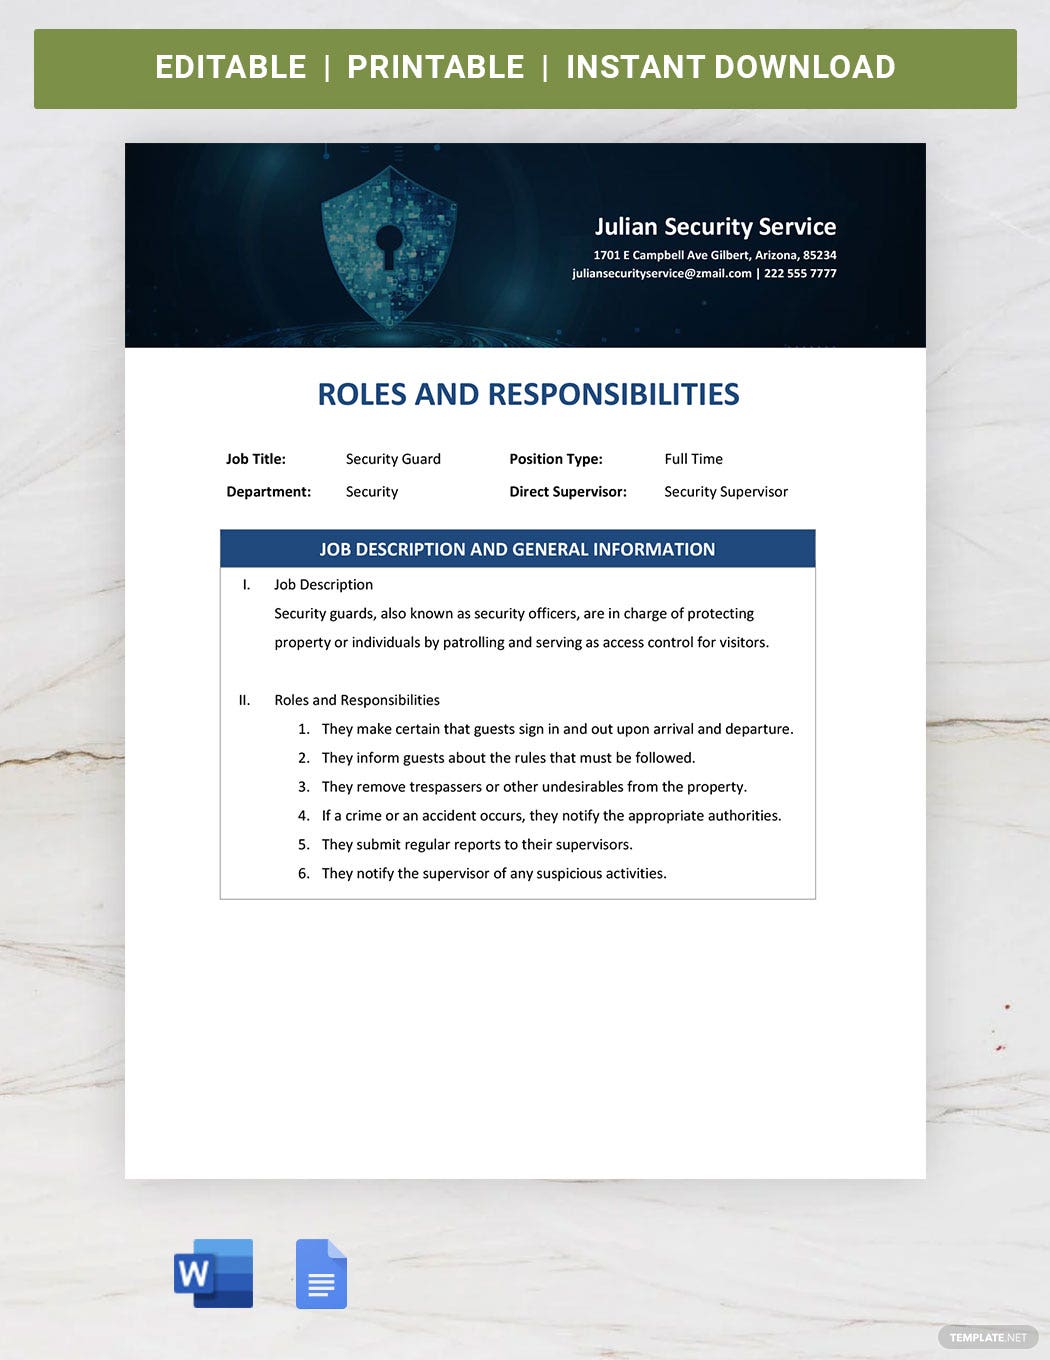 security-roles-and-responsibilities-